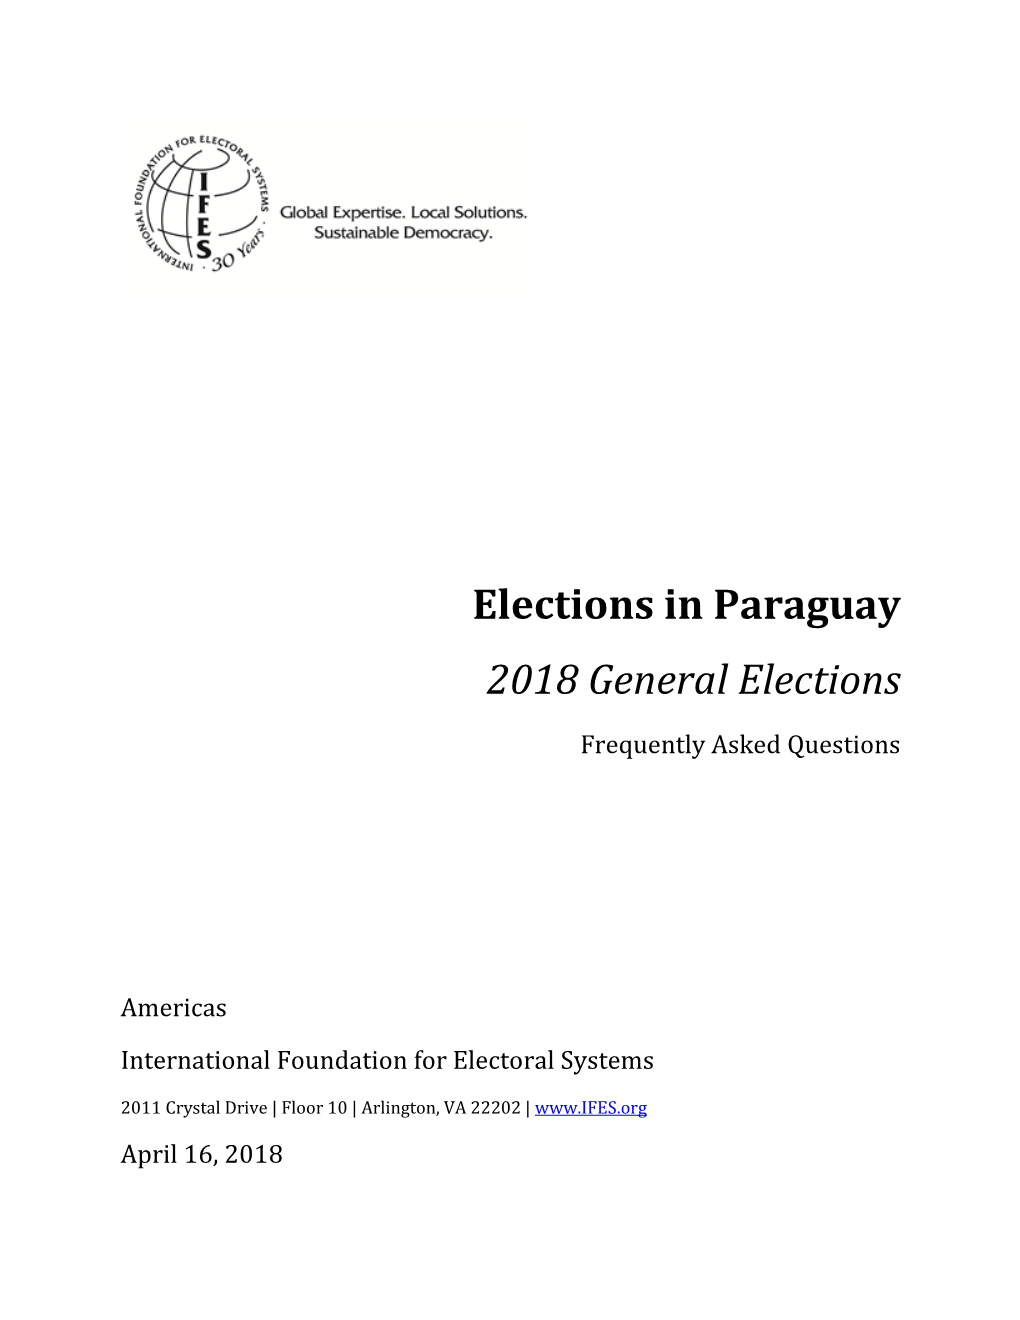 IFES Faqs on Elections in Paraguay: 2018 General Elections